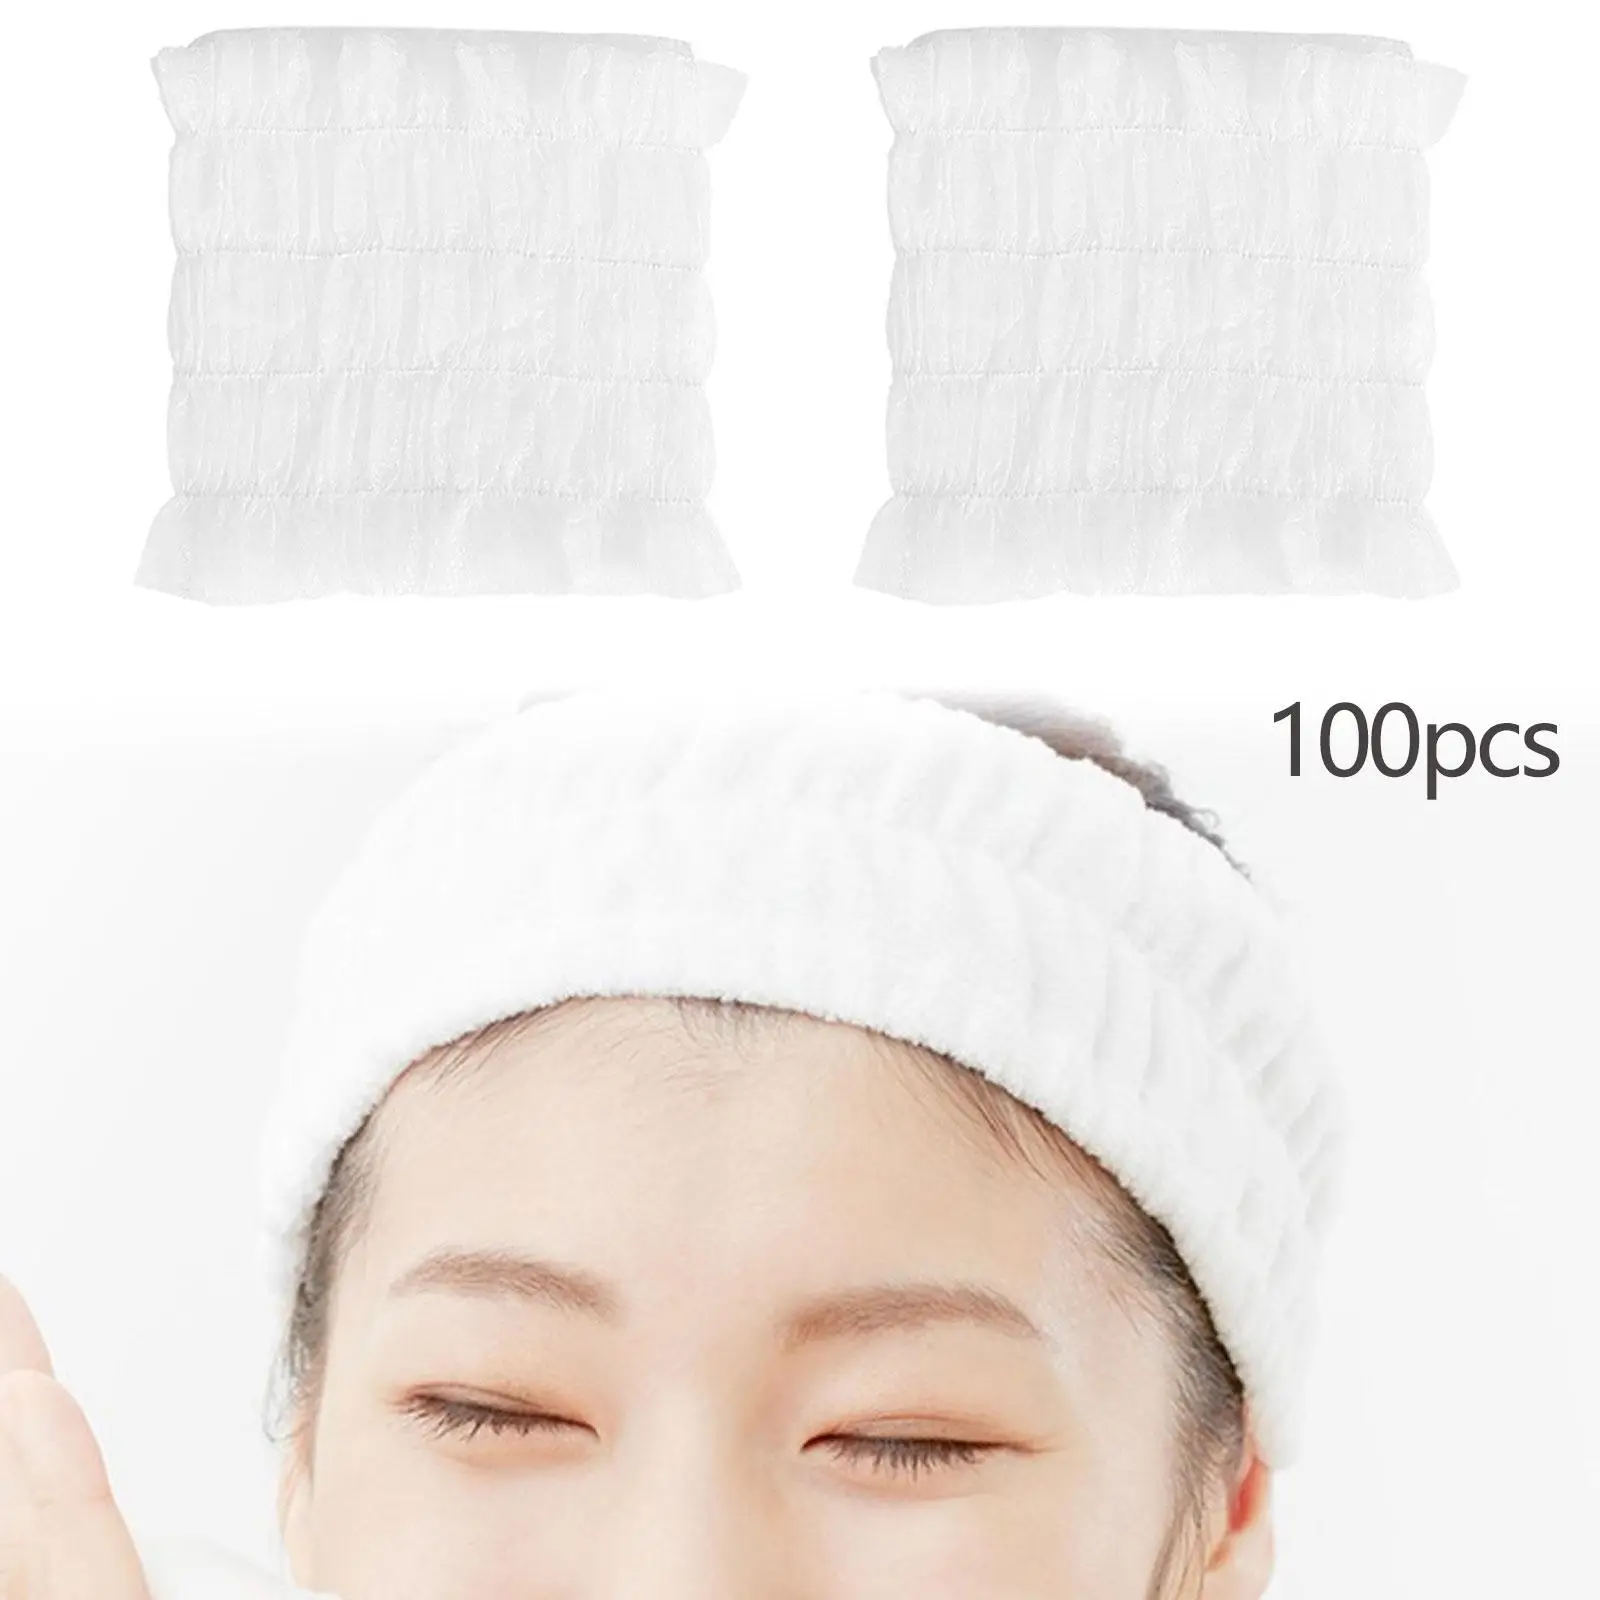 100 Pieces Nonwoven Hair Tie Sauna Womens Head Scarves Turban Headpiece Beauty Headbands for Party Makeup Shower Washing Face